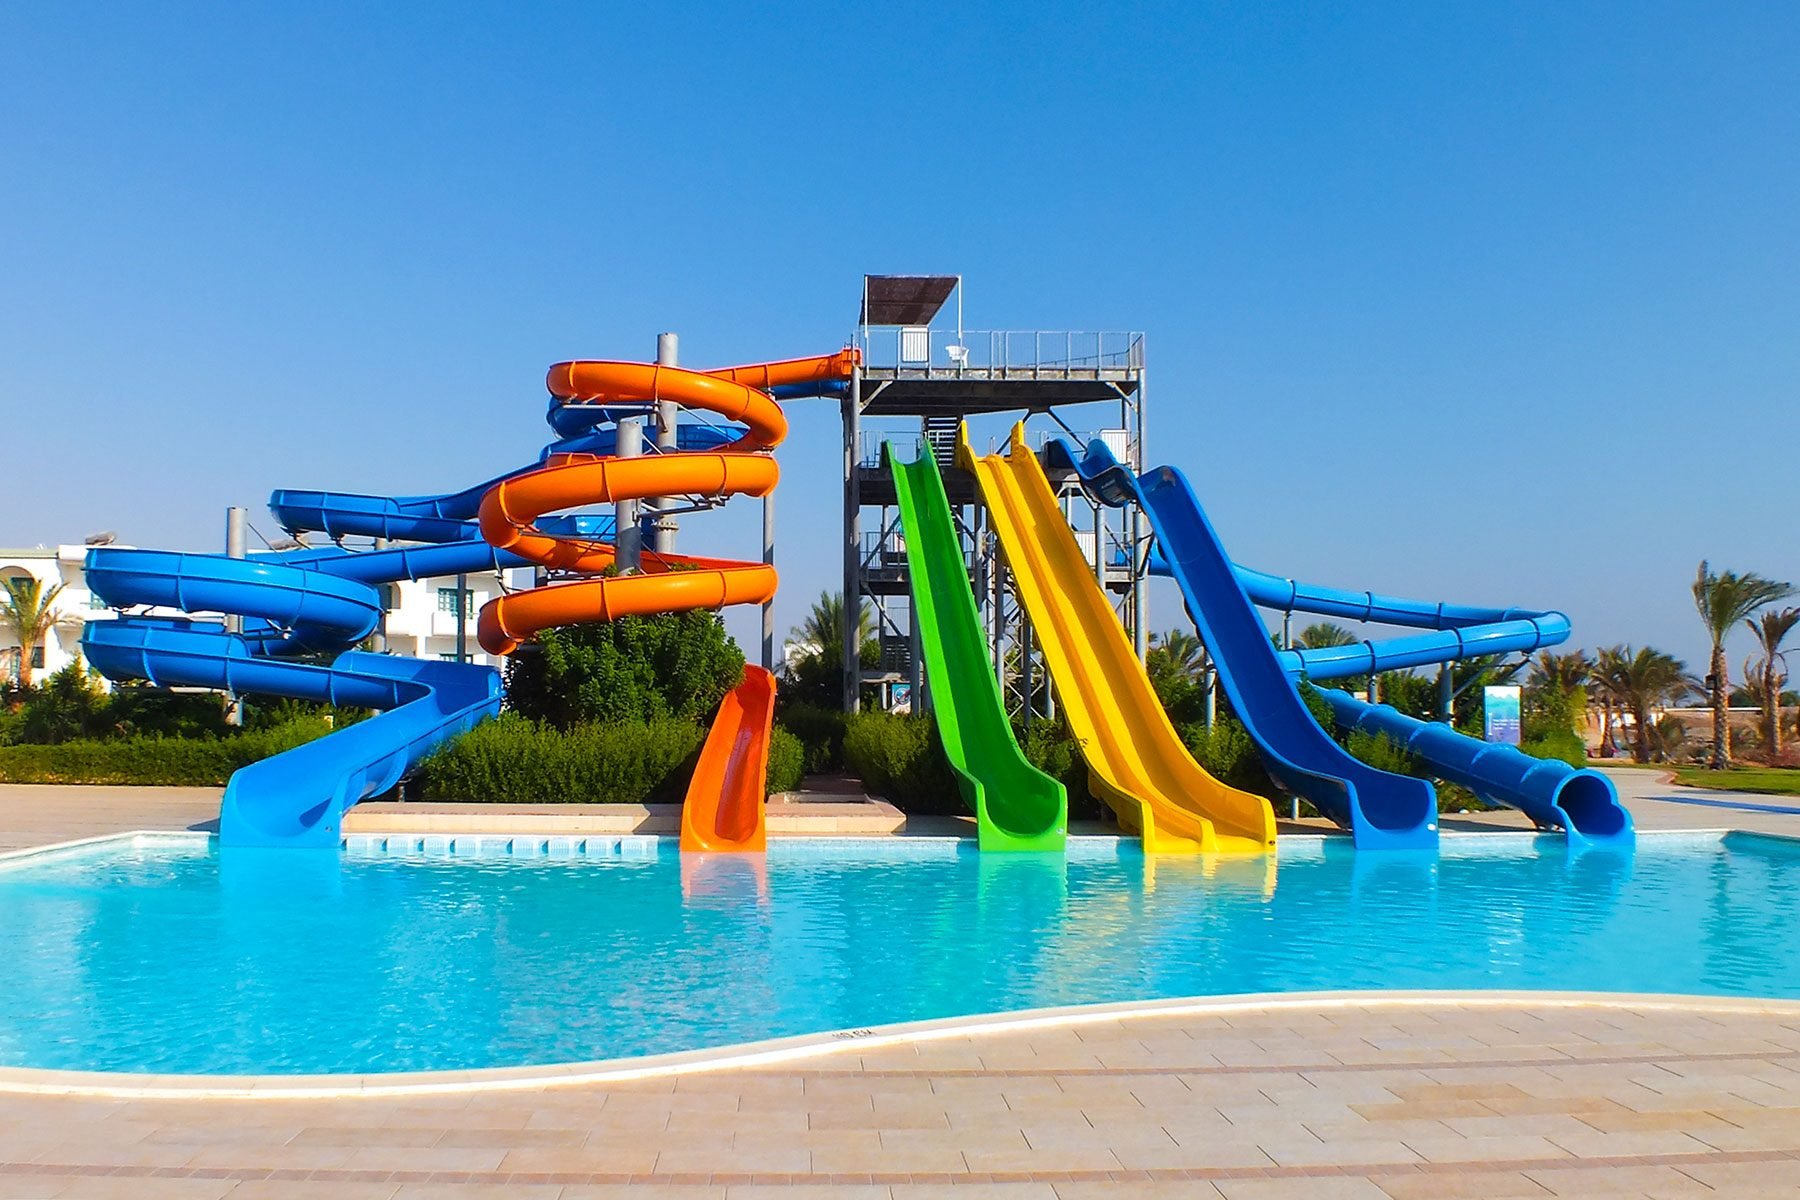 https://www.rd.com/wp-content/uploads/2019/06/17-Fascinating-Facts-About-Water-Parks_GettyImages-163195371_FT.jpg?fit=700%2C1024